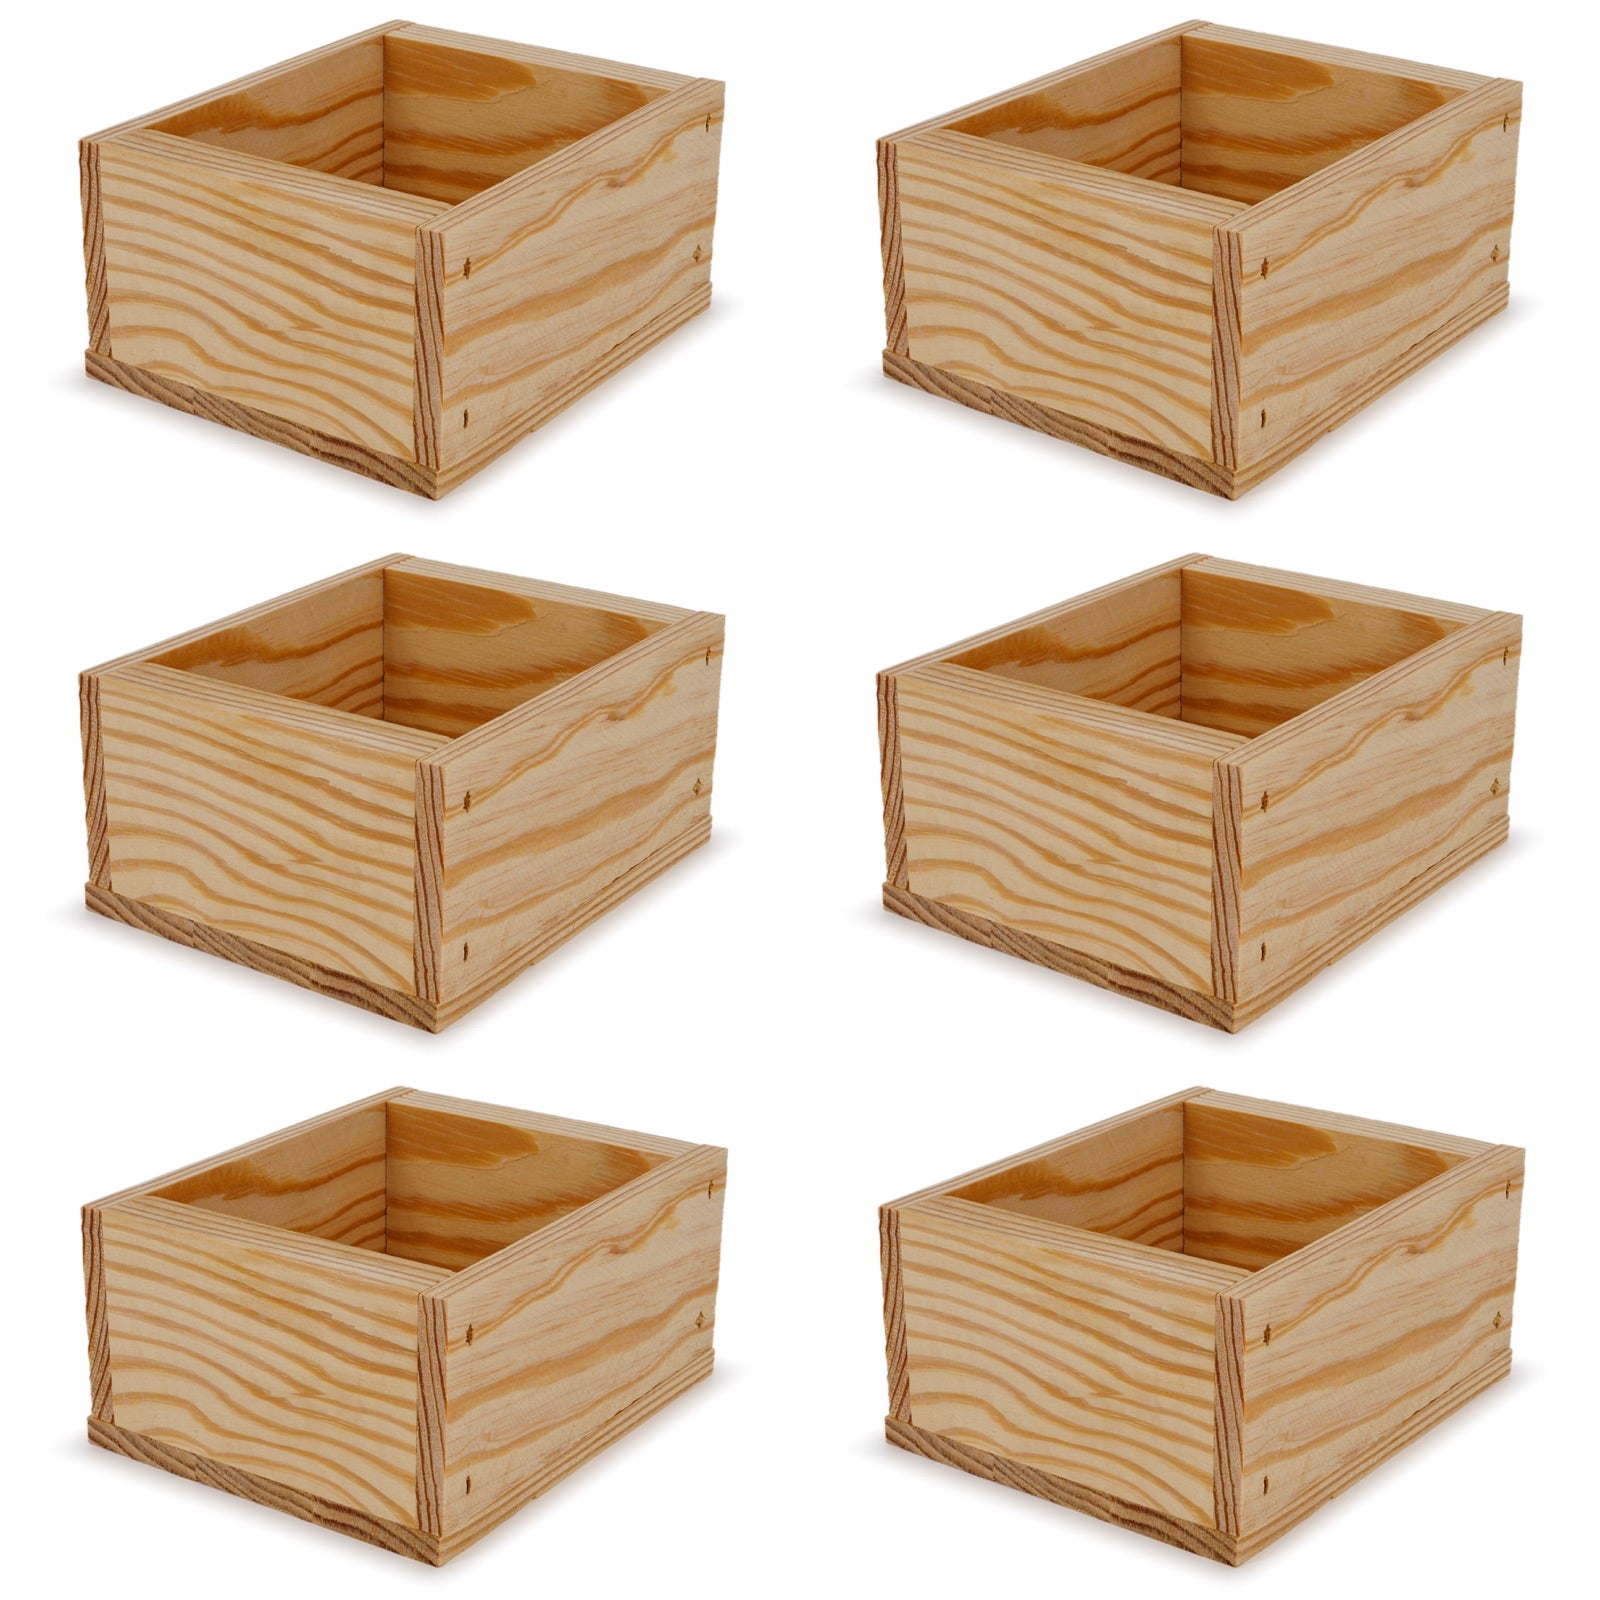 6 Small wooden crates 5x4.5x2.75